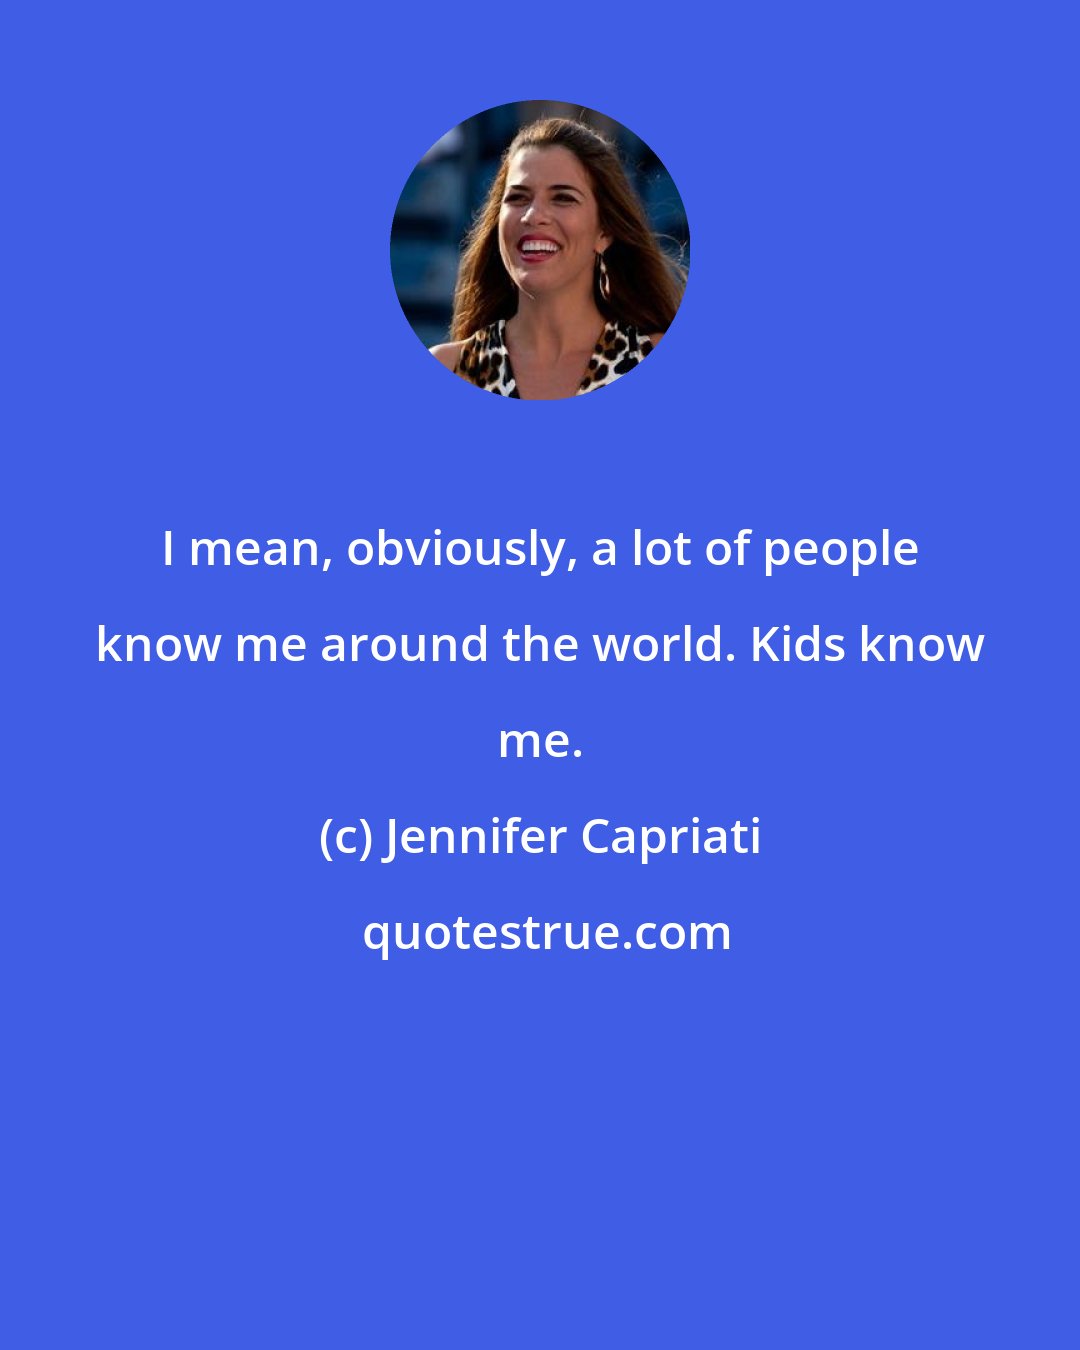 Jennifer Capriati: I mean, obviously, a lot of people know me around the world. Kids know me.